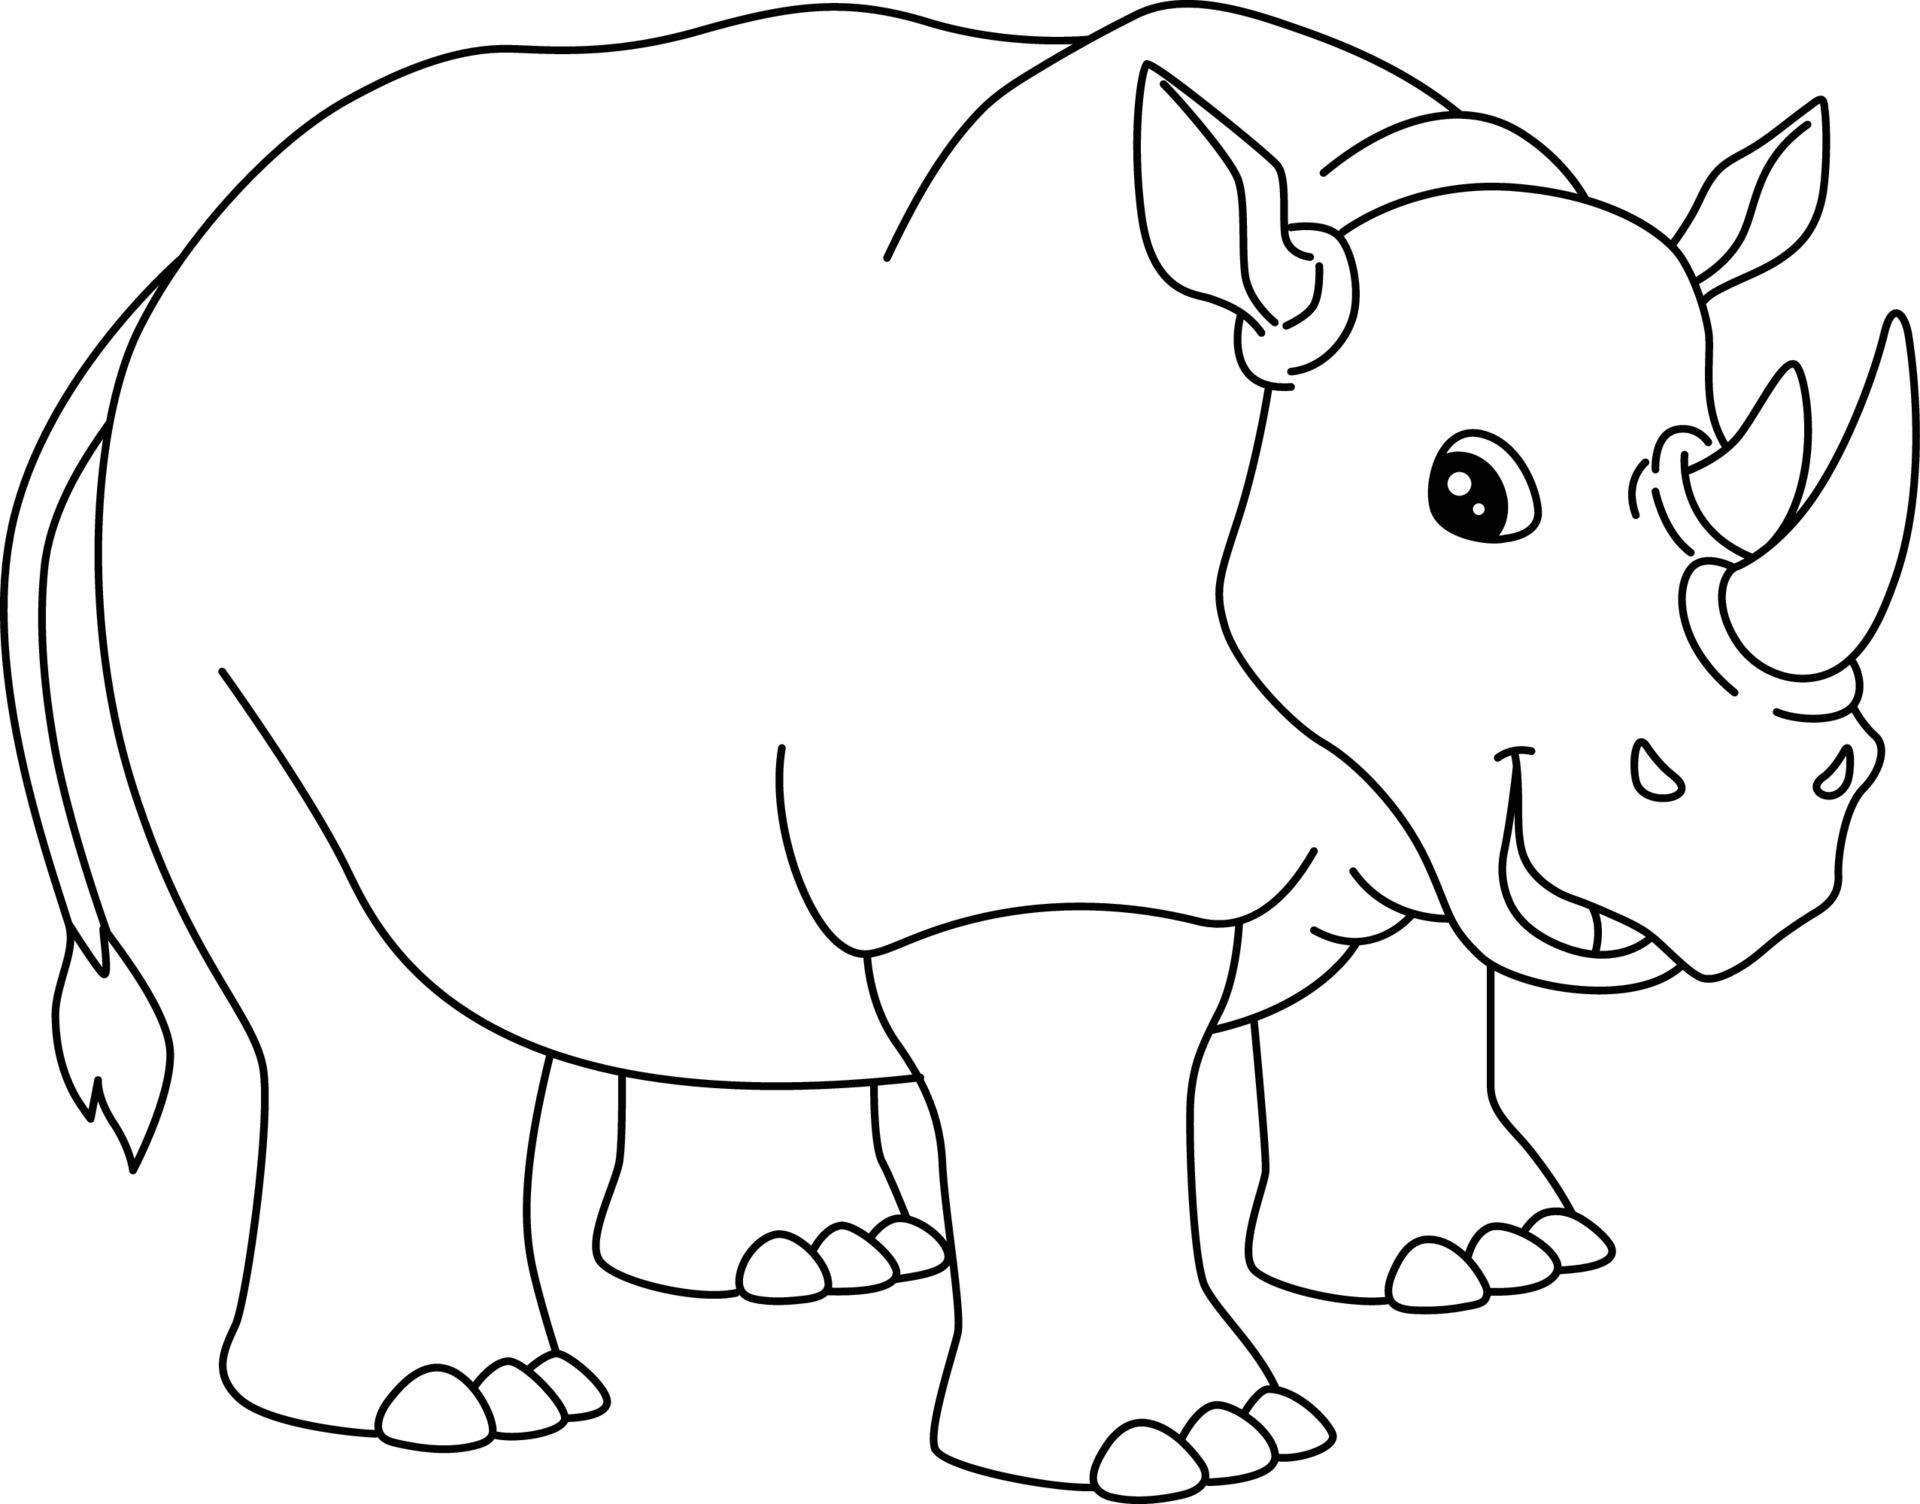 Coloring page dazzling woolly rhinoceros